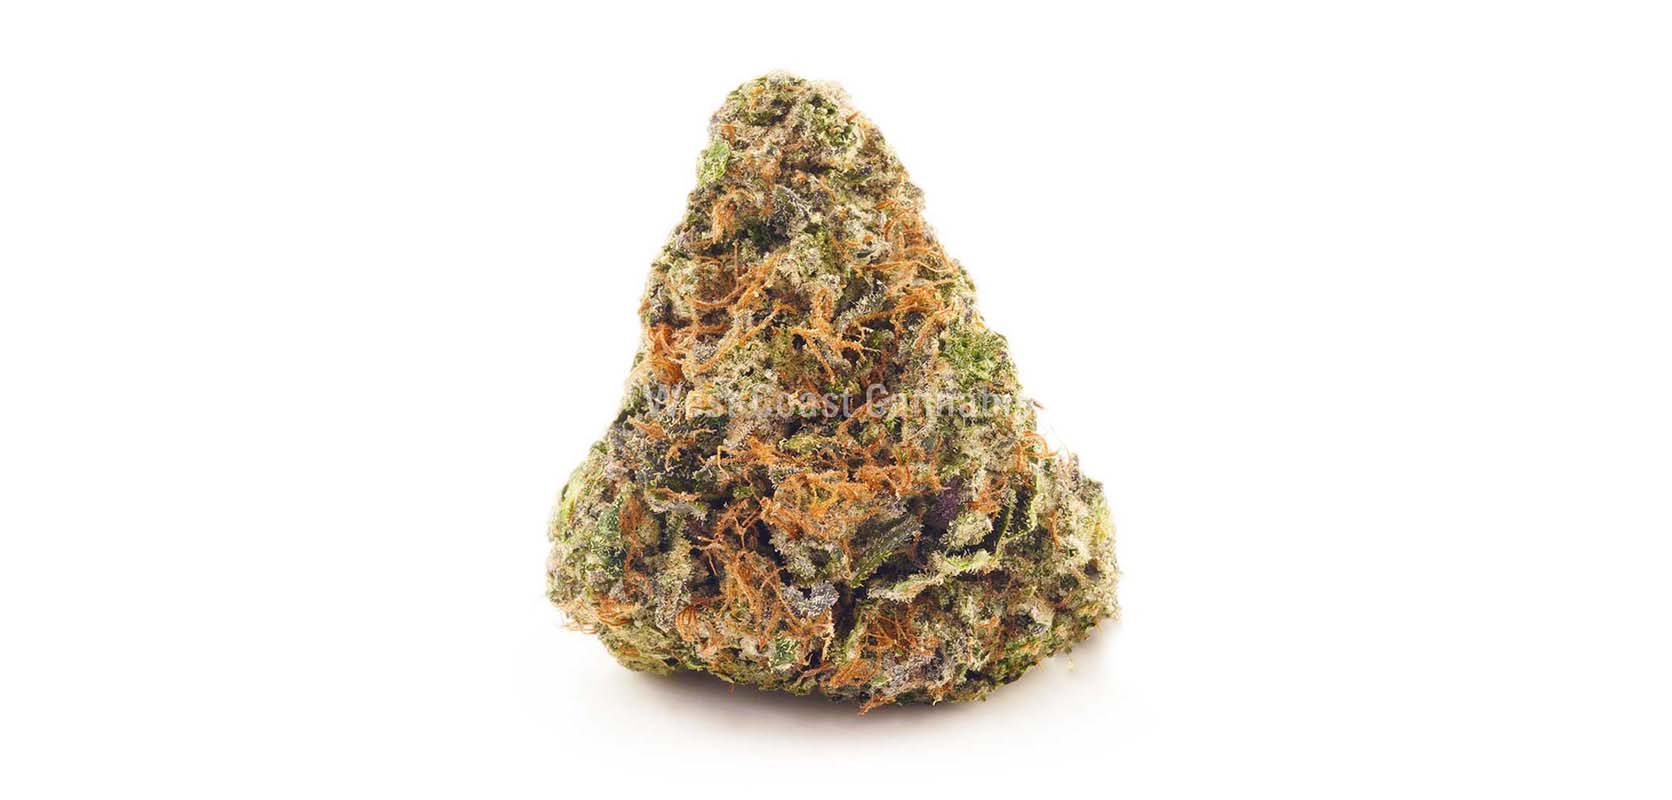 Bruce Banner weed online Canada. Buy weed online from an online dispensary with mail order marijuana in Canada. Buy weed.